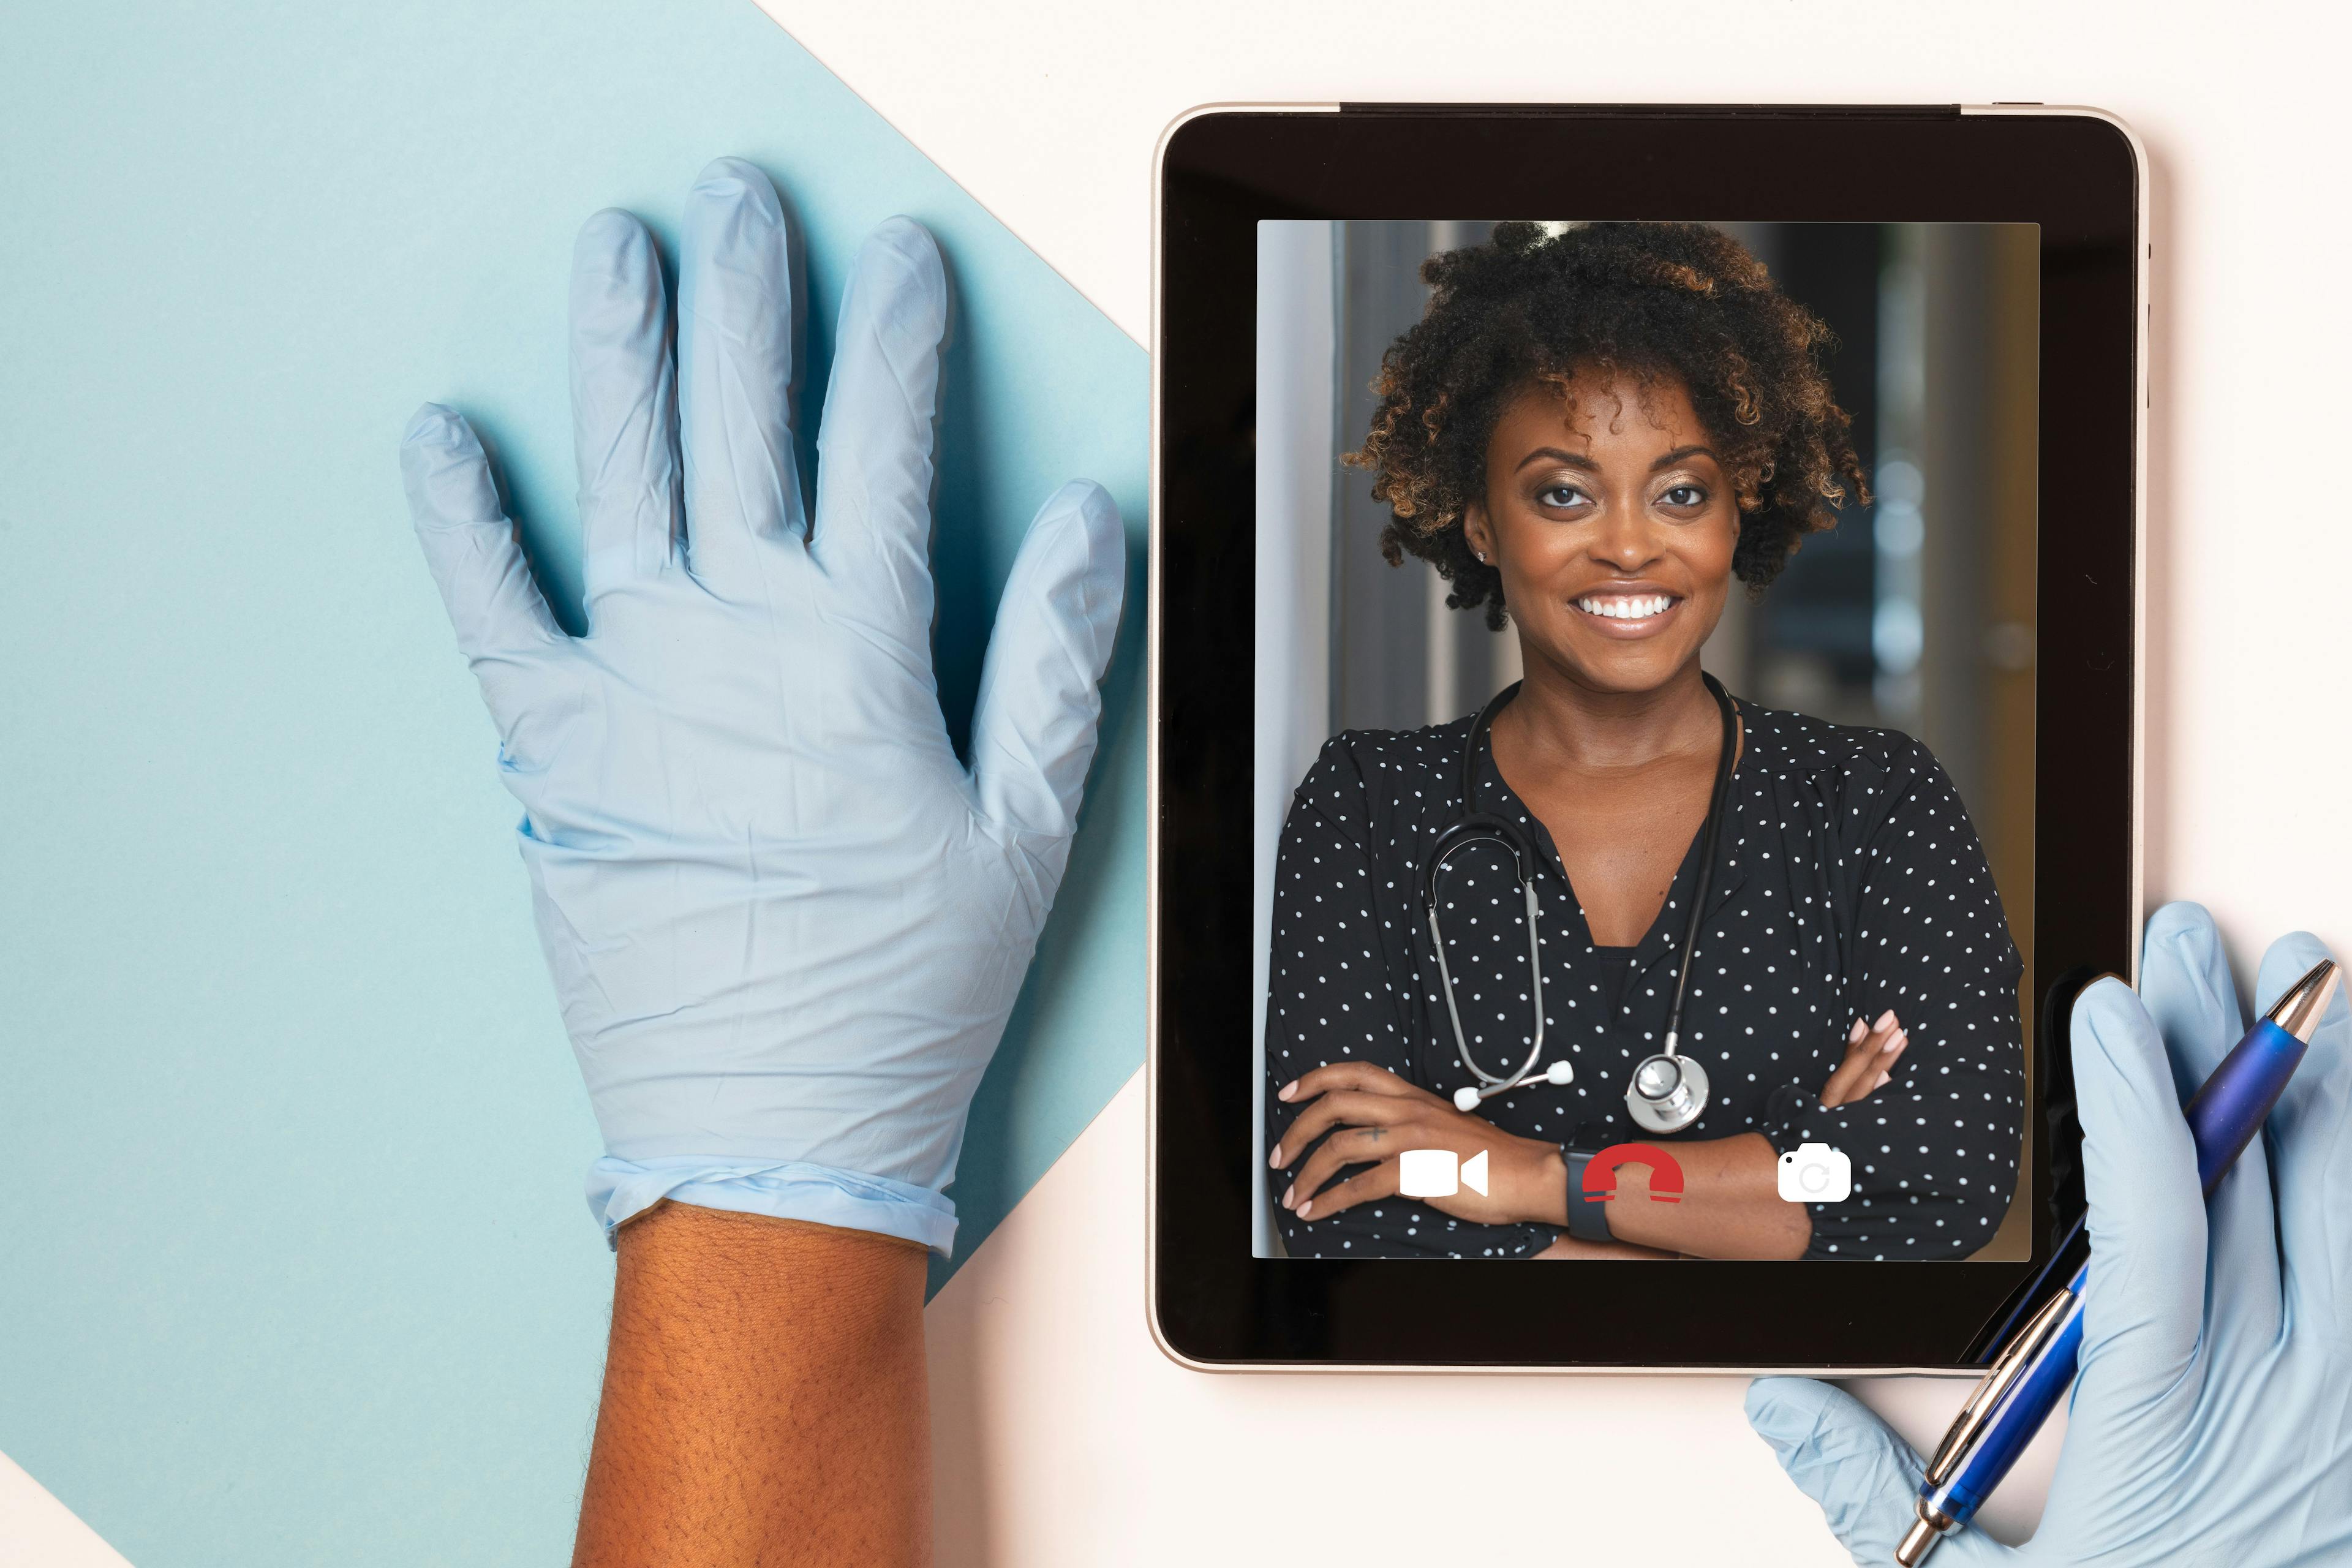 Will telehealth persist after the pandemic?